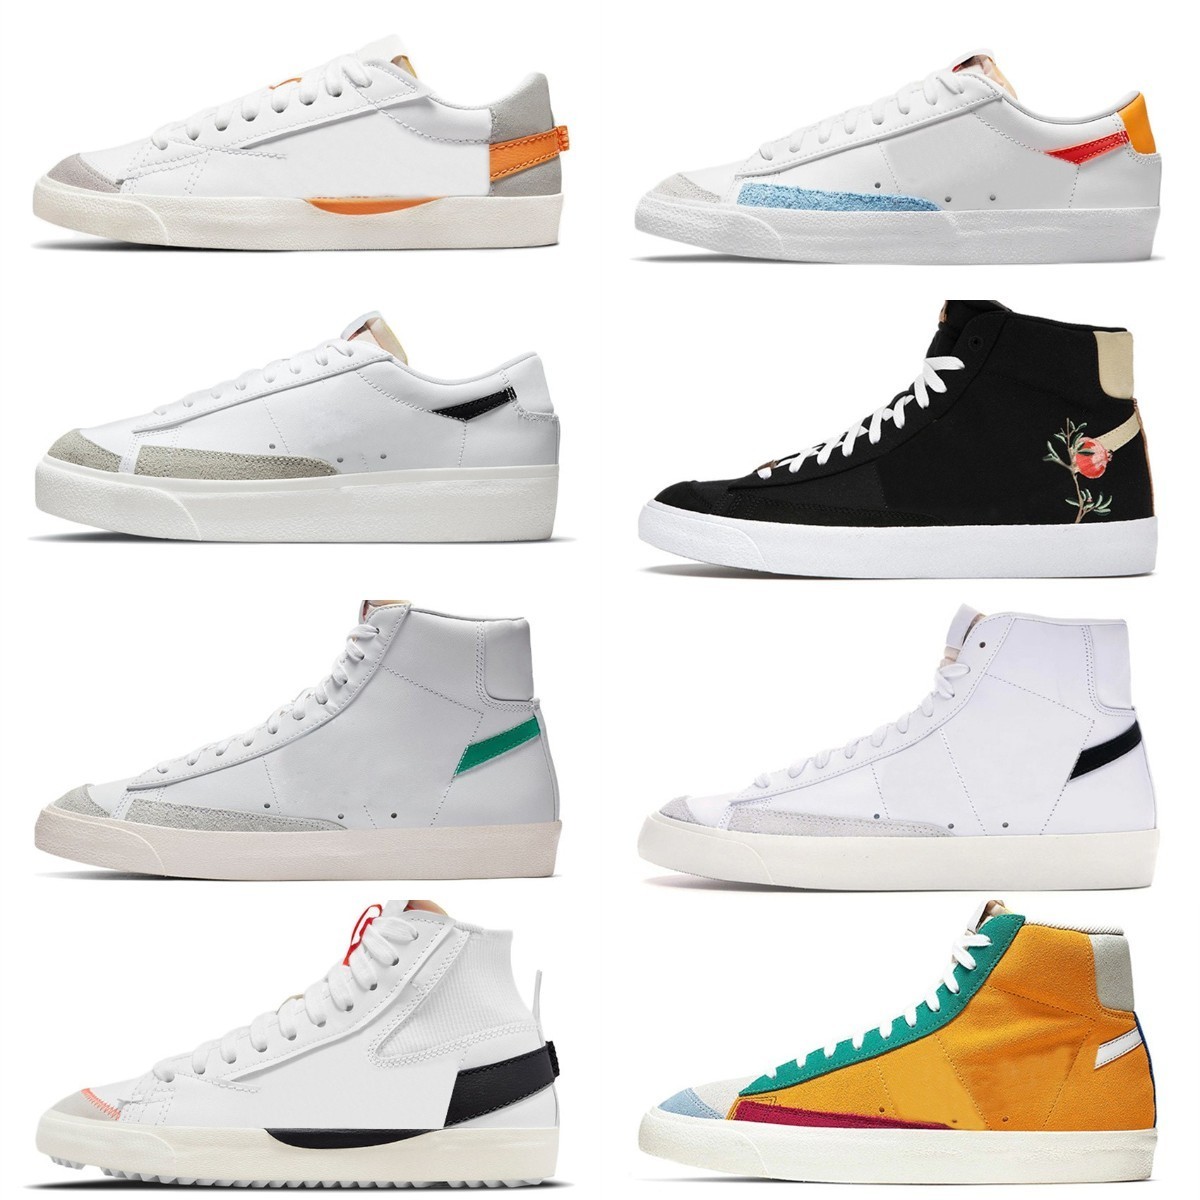 

2022 Blazer Mid 77 Vintage Jumbo Casual Shoes Men Women Blazers OG Black White Sketch Red Indigo Pine Green Summit Arctic Punch Mens Trainers Platform Sneakers S58, Please contact us